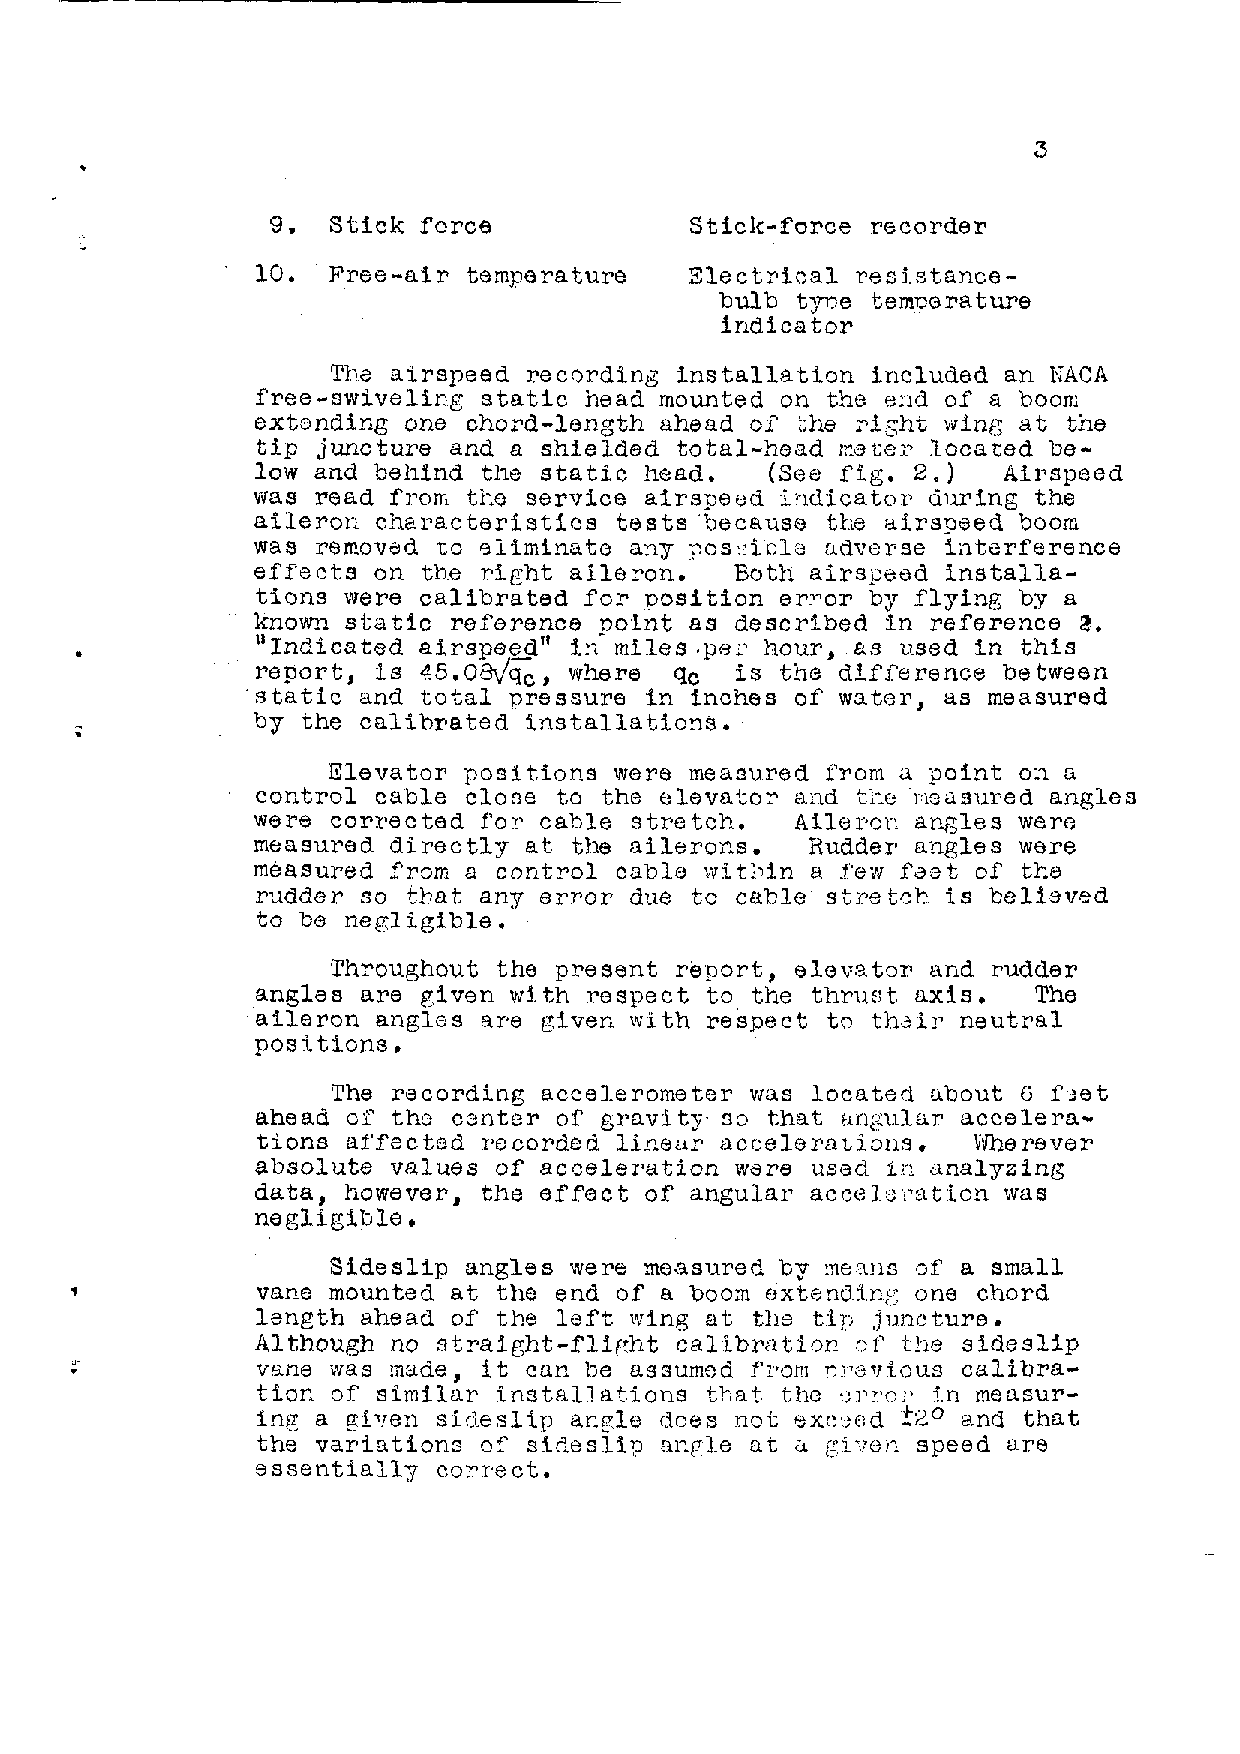 Sample page 3 from AirCorps Library document: Memorandum Report on the Flying Qualities of the Bell P-39D-1